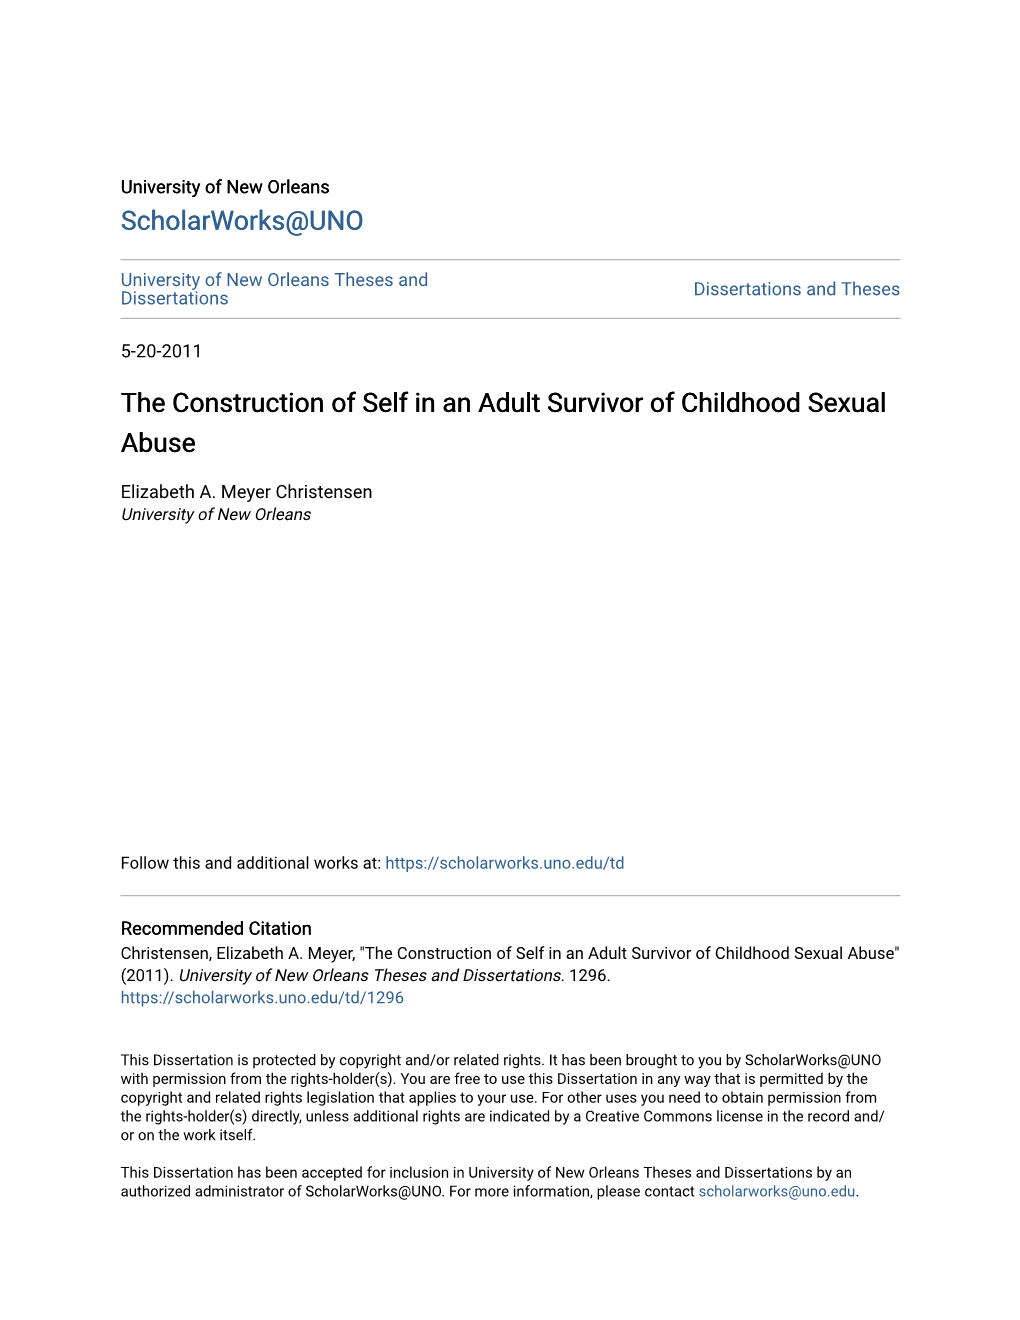 The Construction of Self in an Adult Survivor of Childhood Sexual Abuse